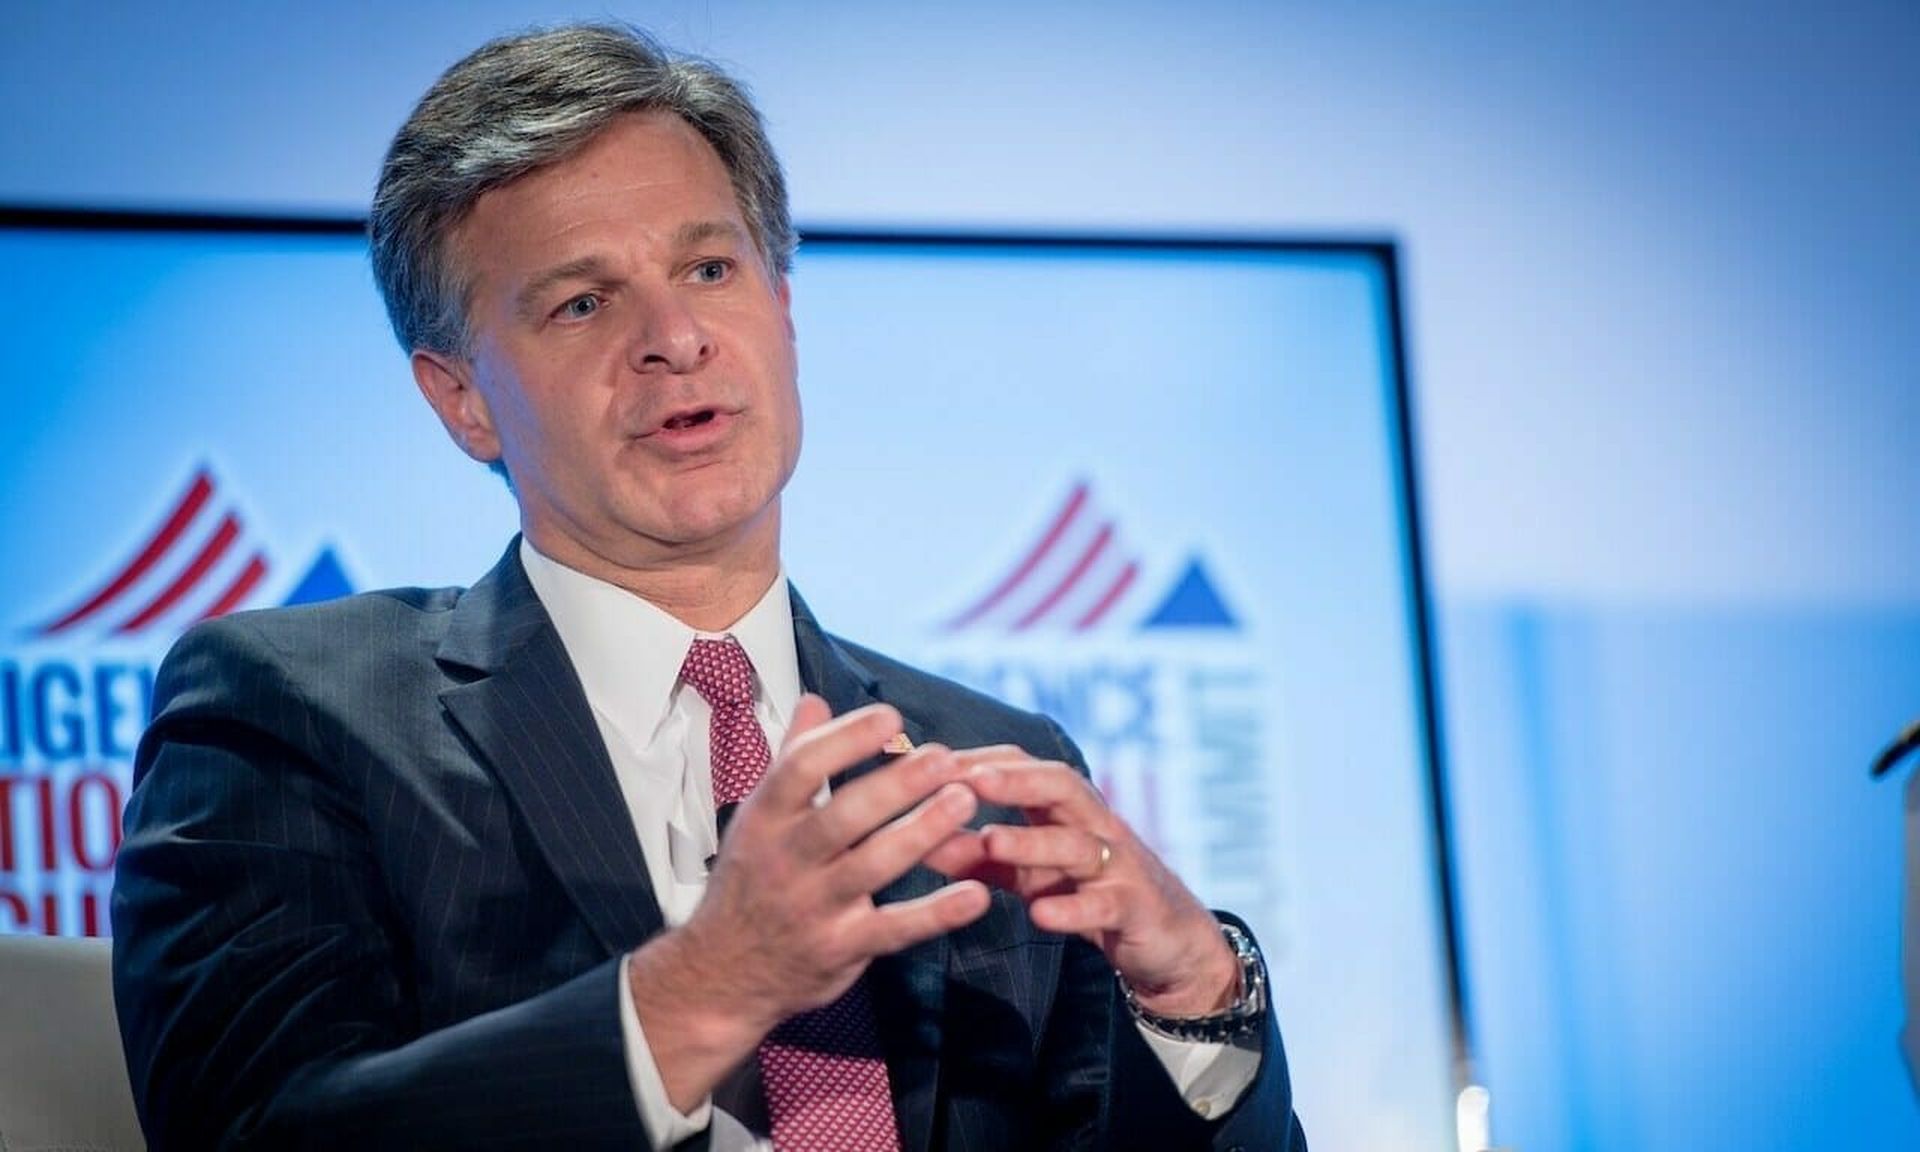 FBI Director Christopher Wray speaks at an event in Washington, D.C. Security pros knew that attacks on VPNs had become serious when the FBI and CISA issued a warning last fall. Today’s columnist, Dor Knafo of Axis Security, says companies have to think of remote access as a business continuity issue.